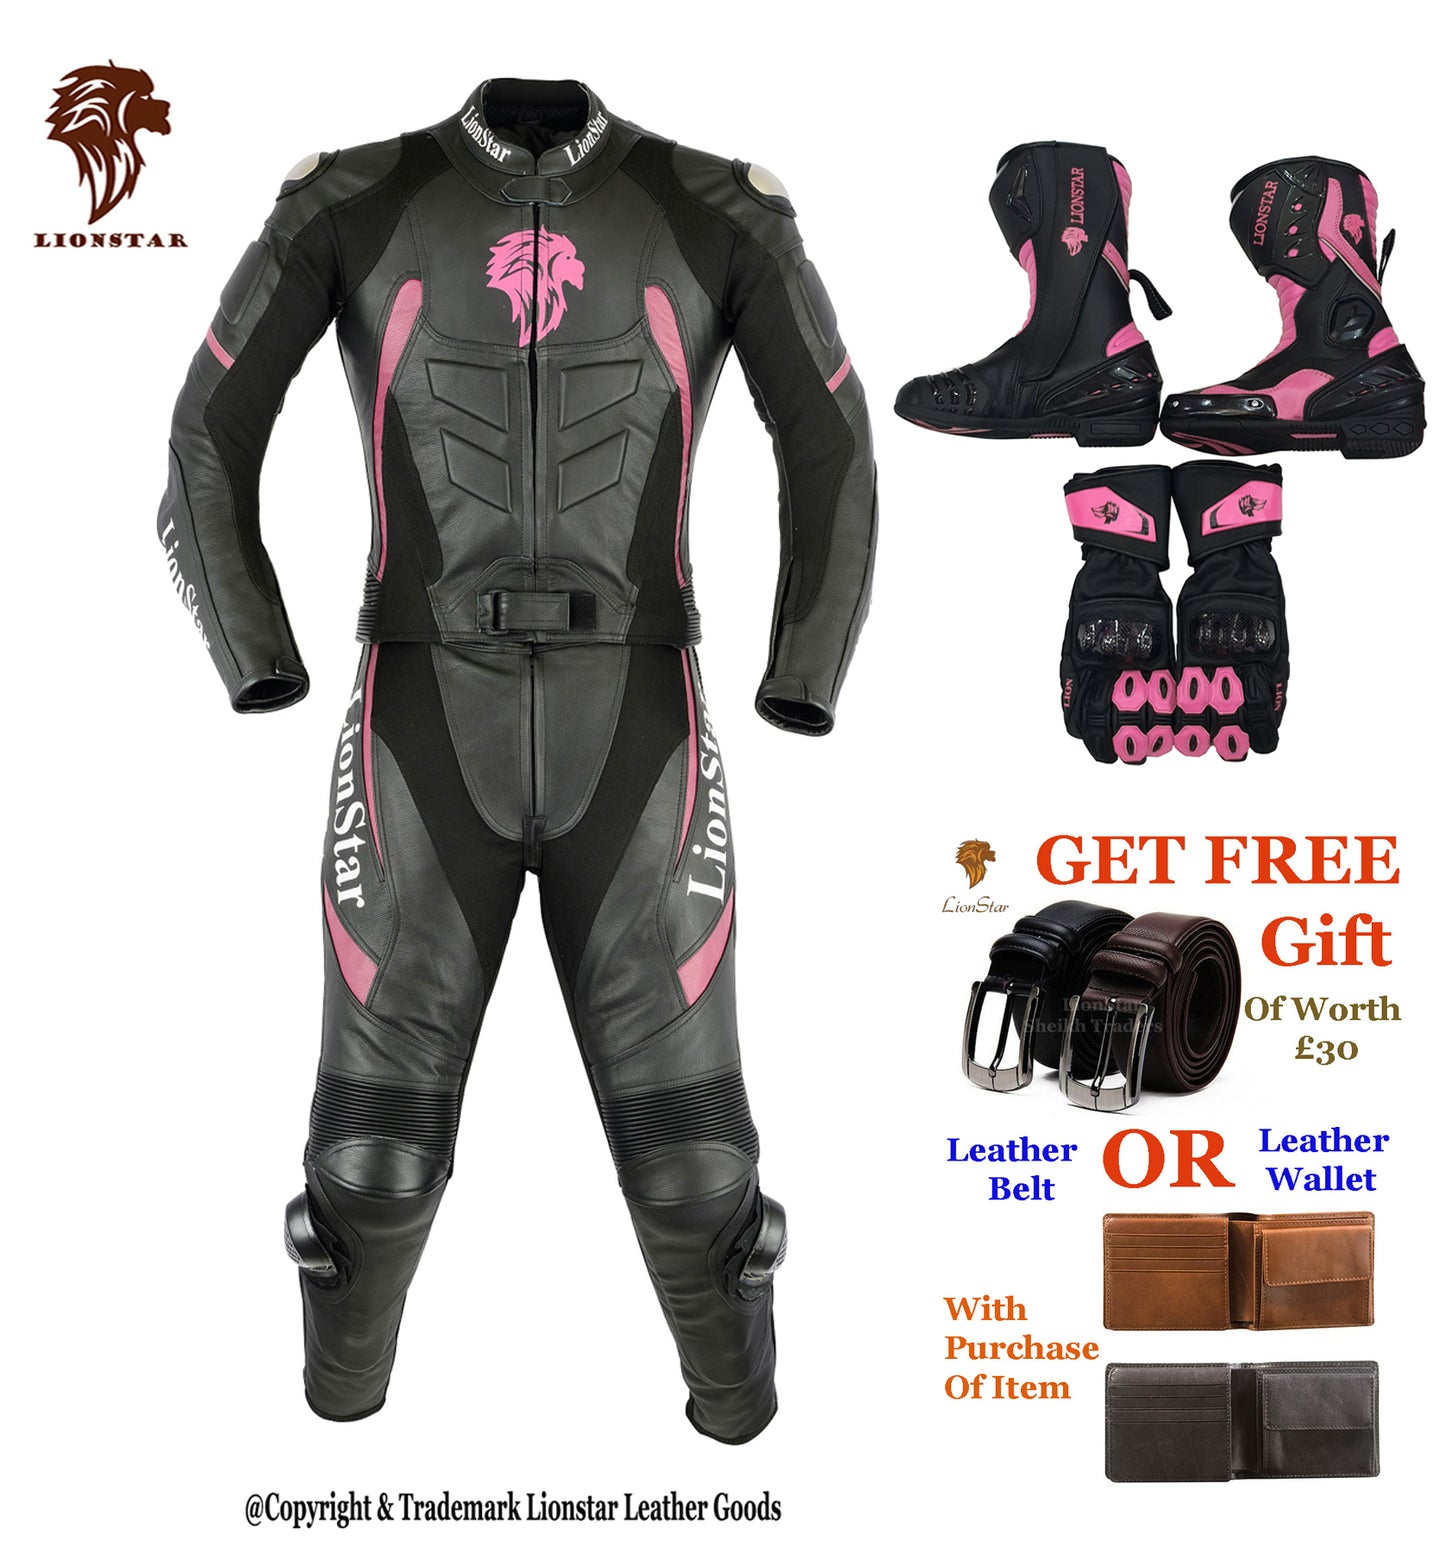 Lionstar Panther Unisex Kids/Adults Motorbike Racing Leather Motorcycle Suit /Full Set (2 Colors Available)